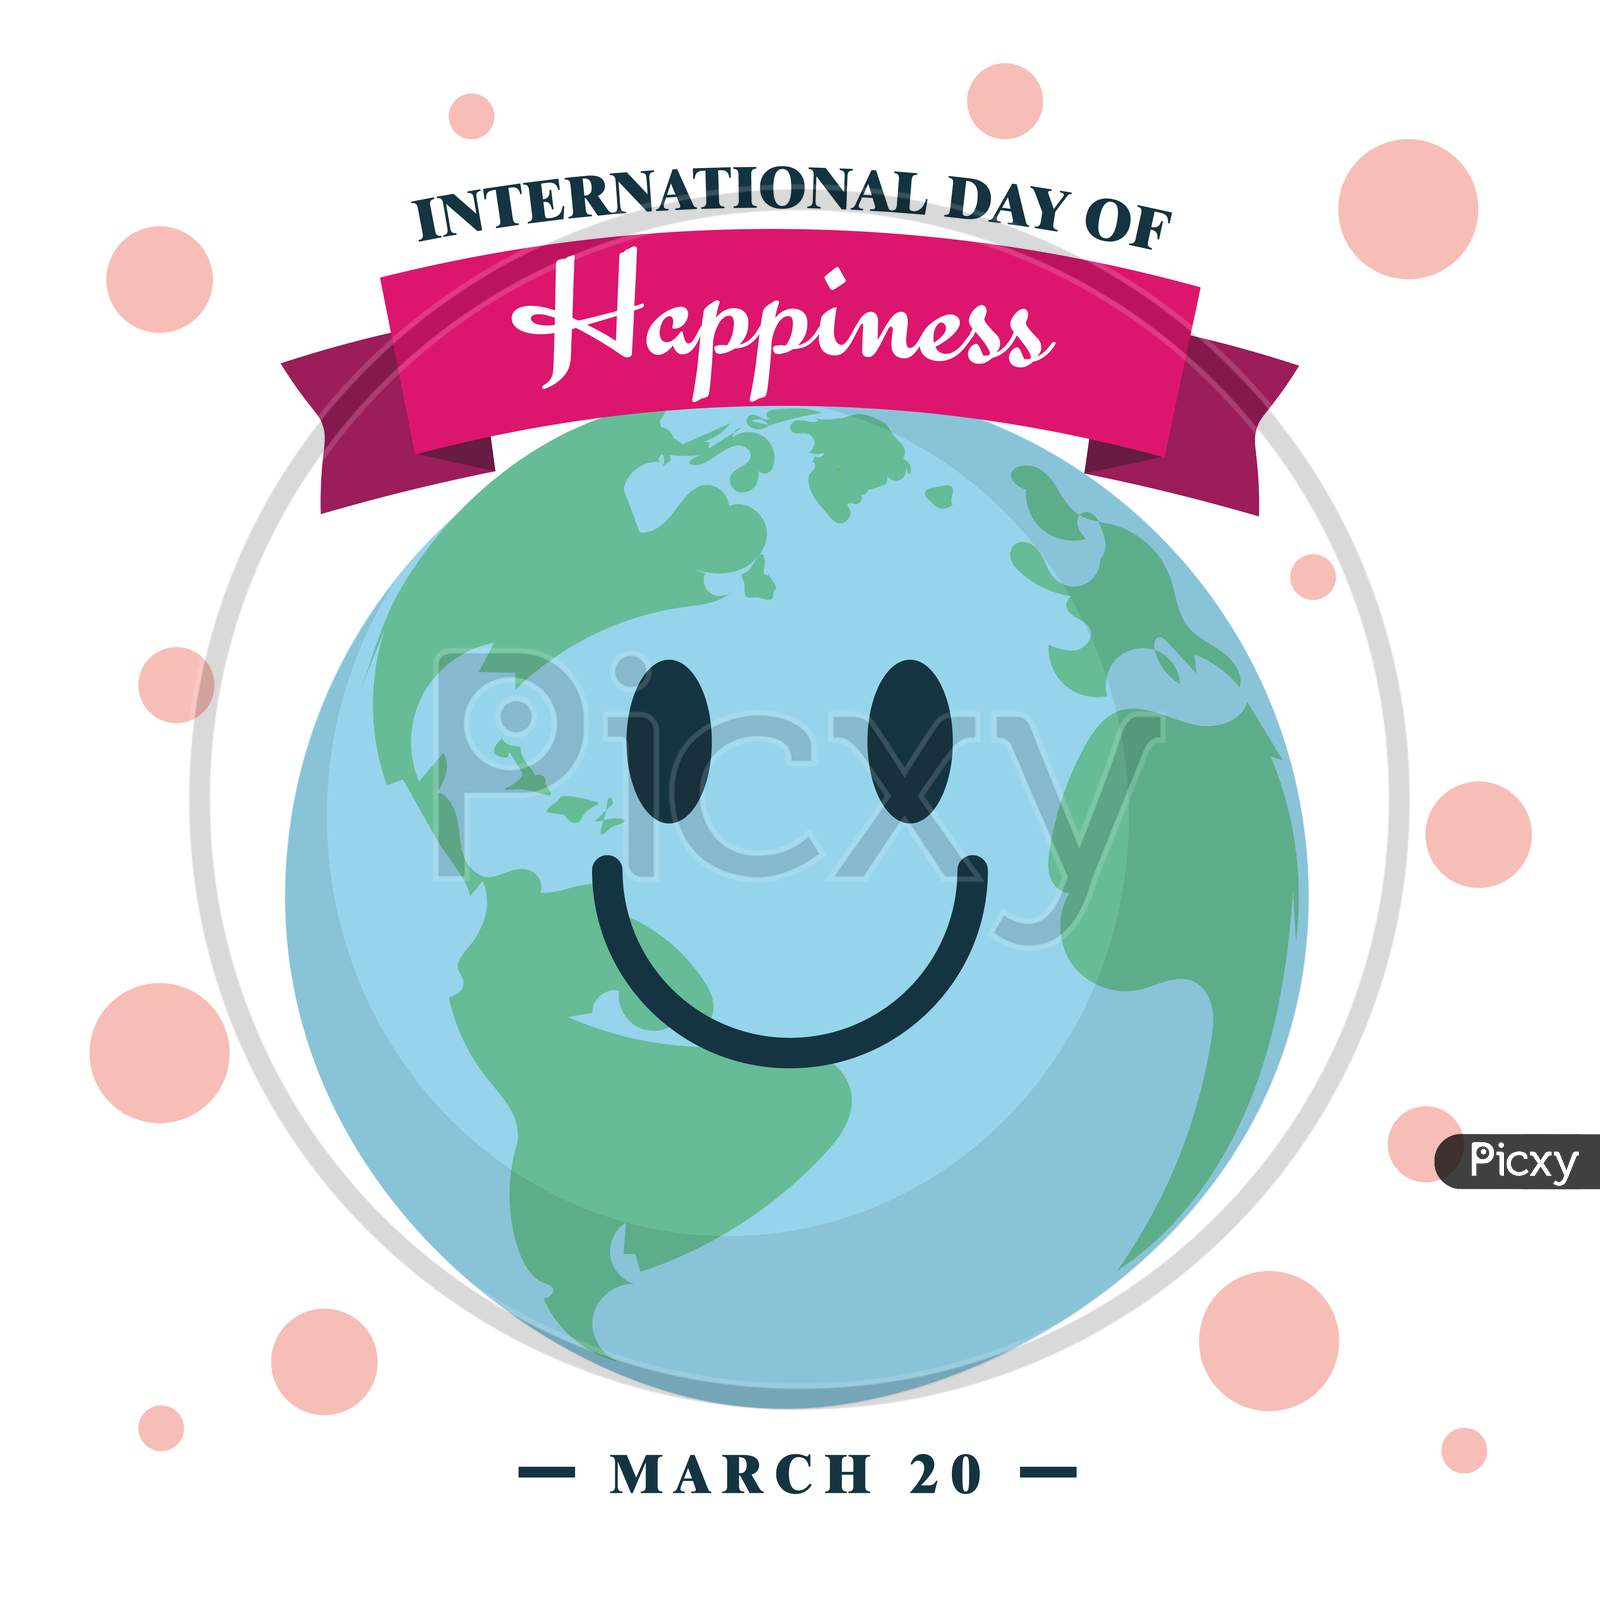 International Day Of Happiness, March 20 Poster, Happy Earth Illustration Vector